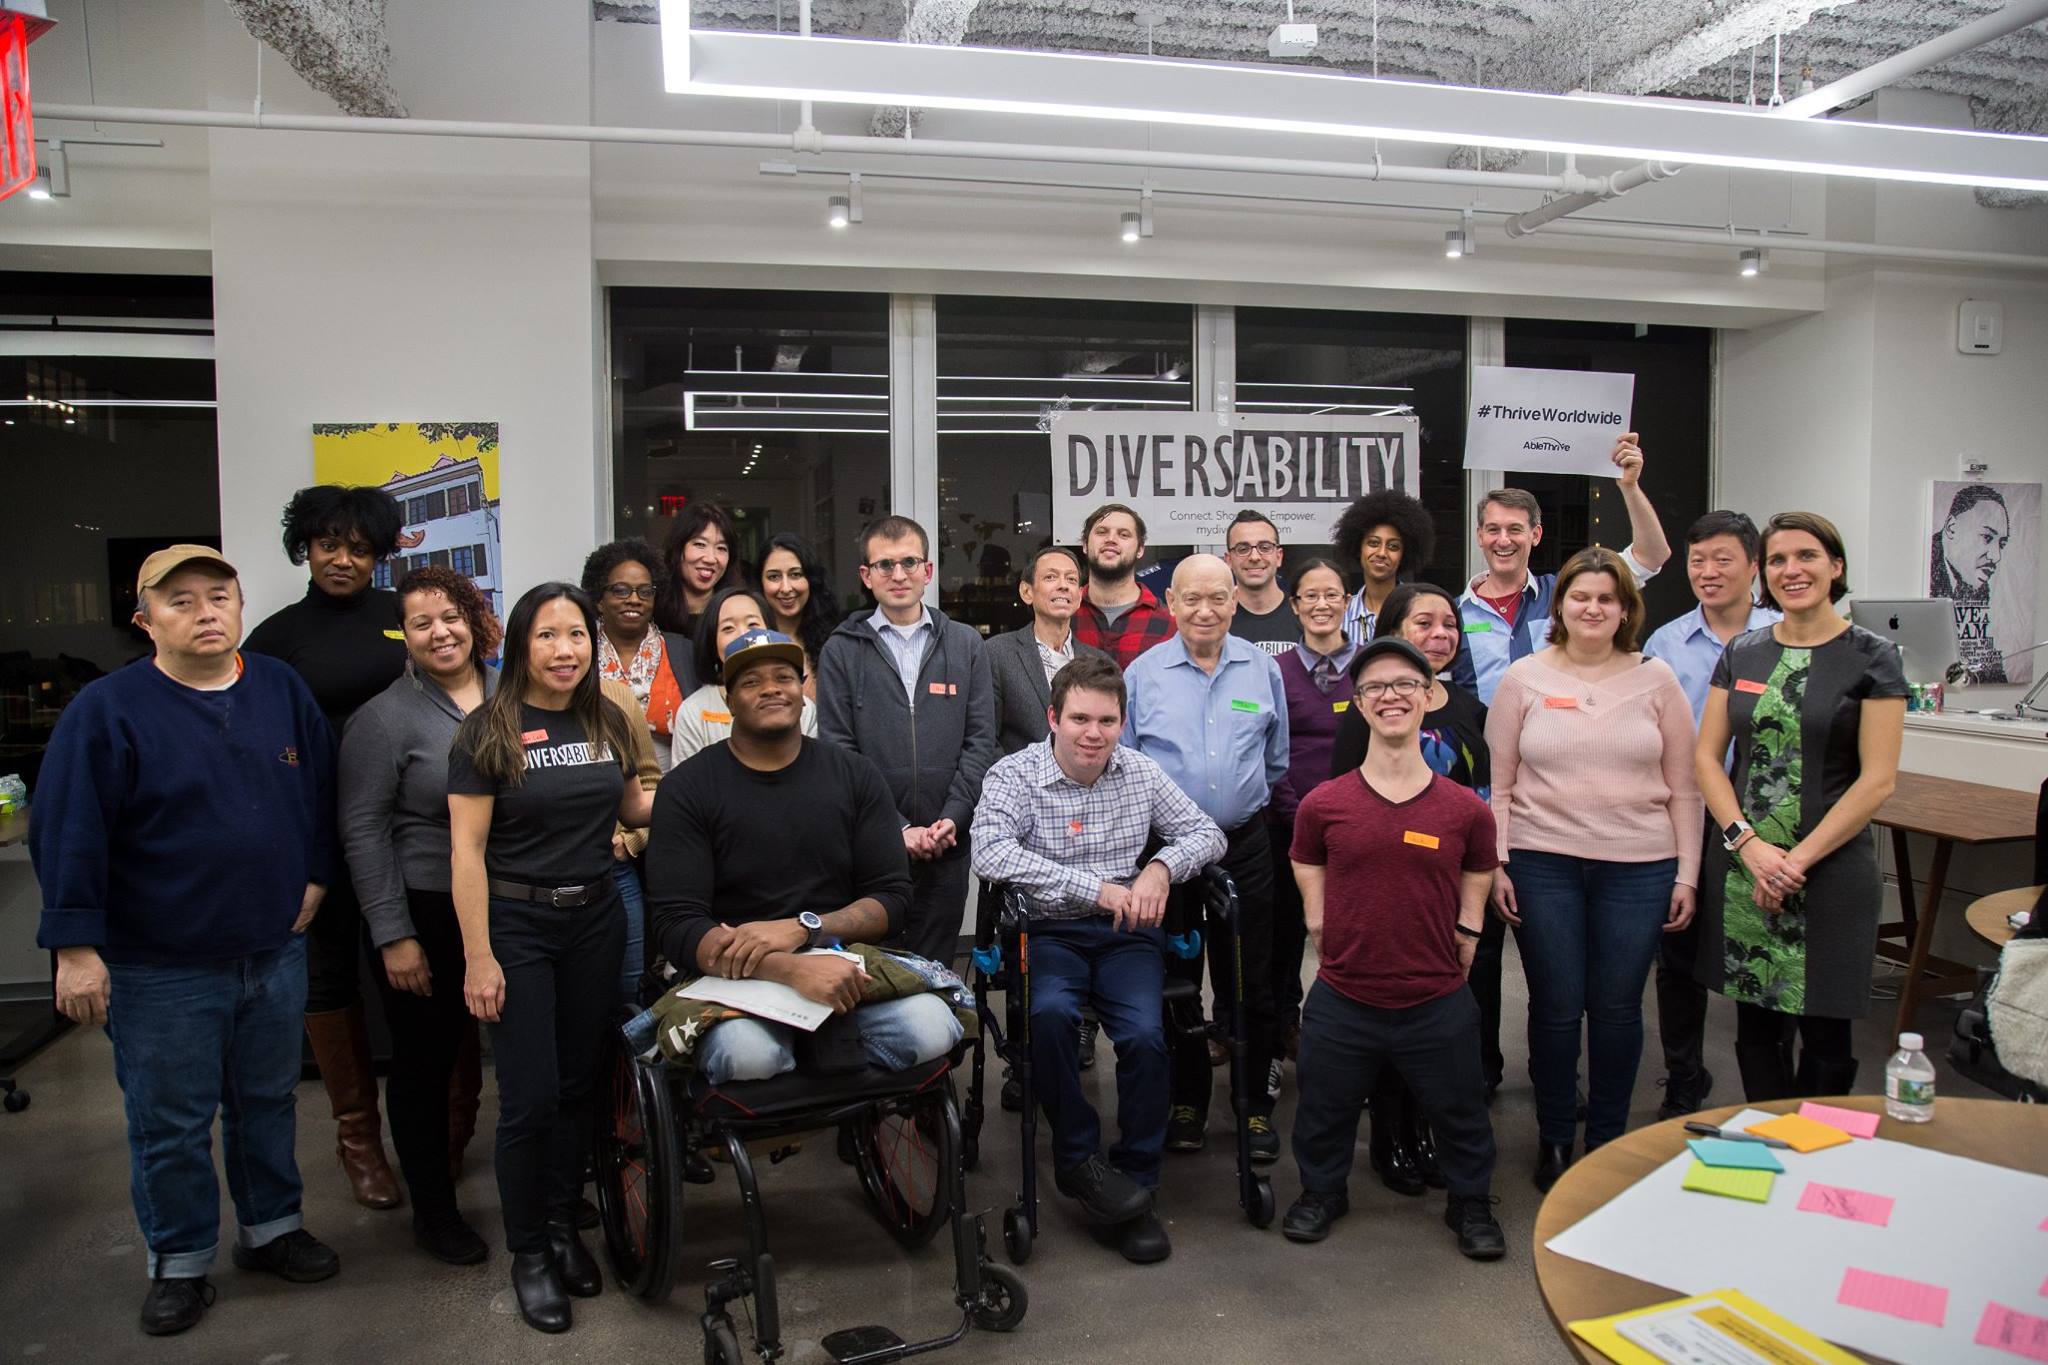 [Photo Description: A large group of Diversability community members posing for a photo at a community event]